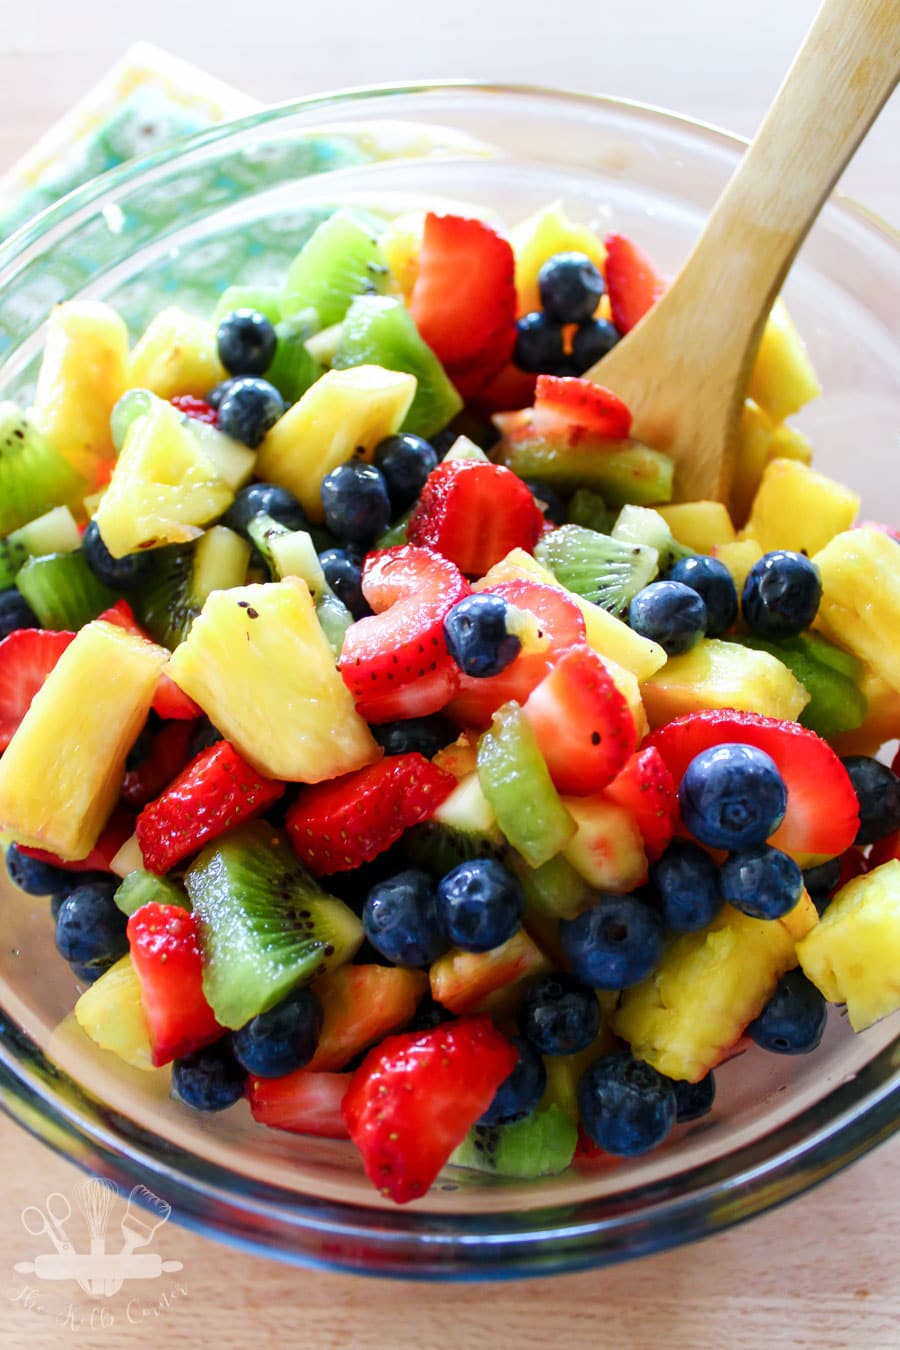 Honey Lime Fruit Salad from Domestically Creative